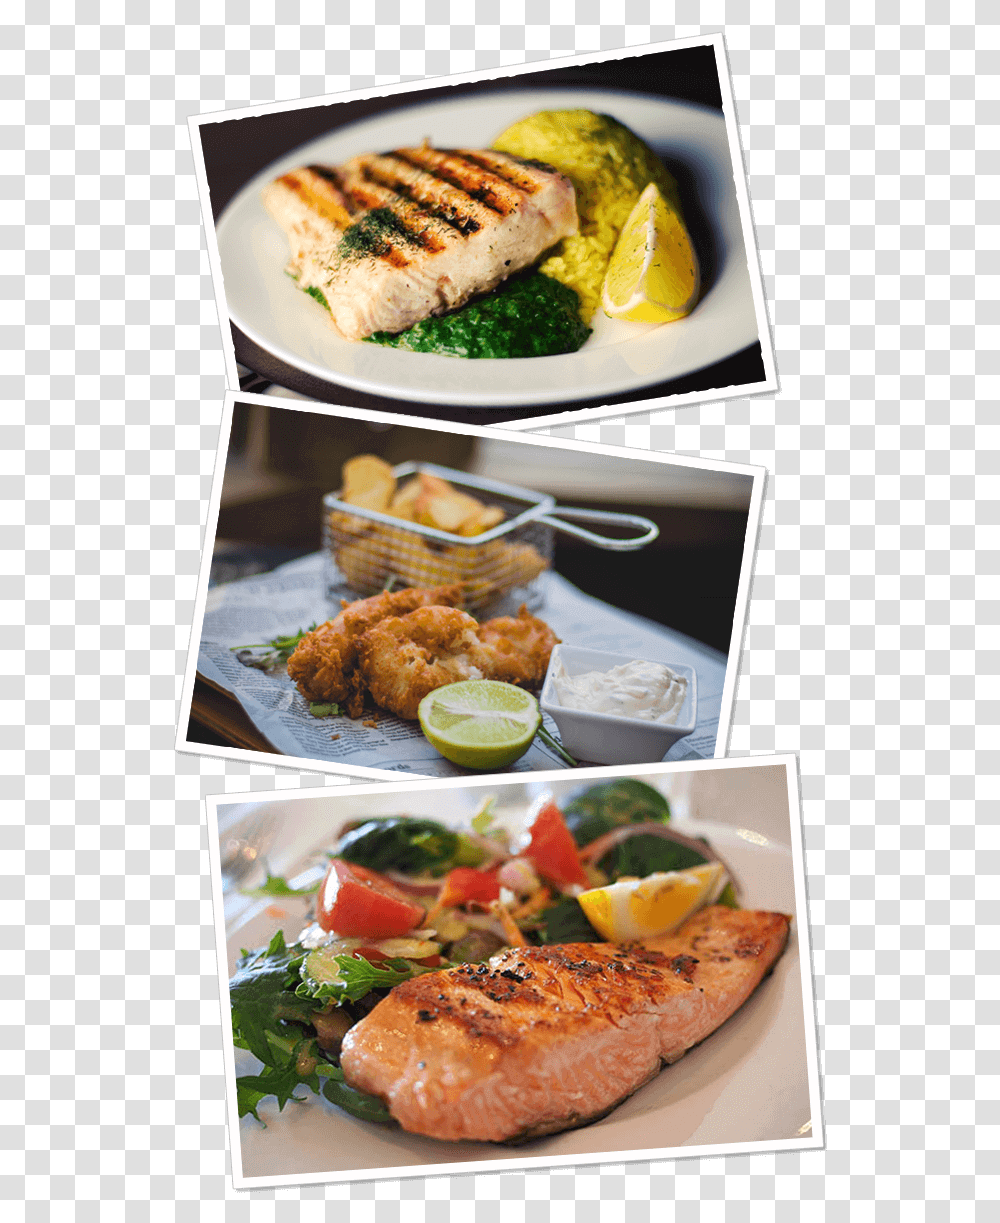 Pictures Of Seafood Recipes Gordon Ramsay Salmon, Citrus Fruit, Plant, Meal, Dish Transparent Png